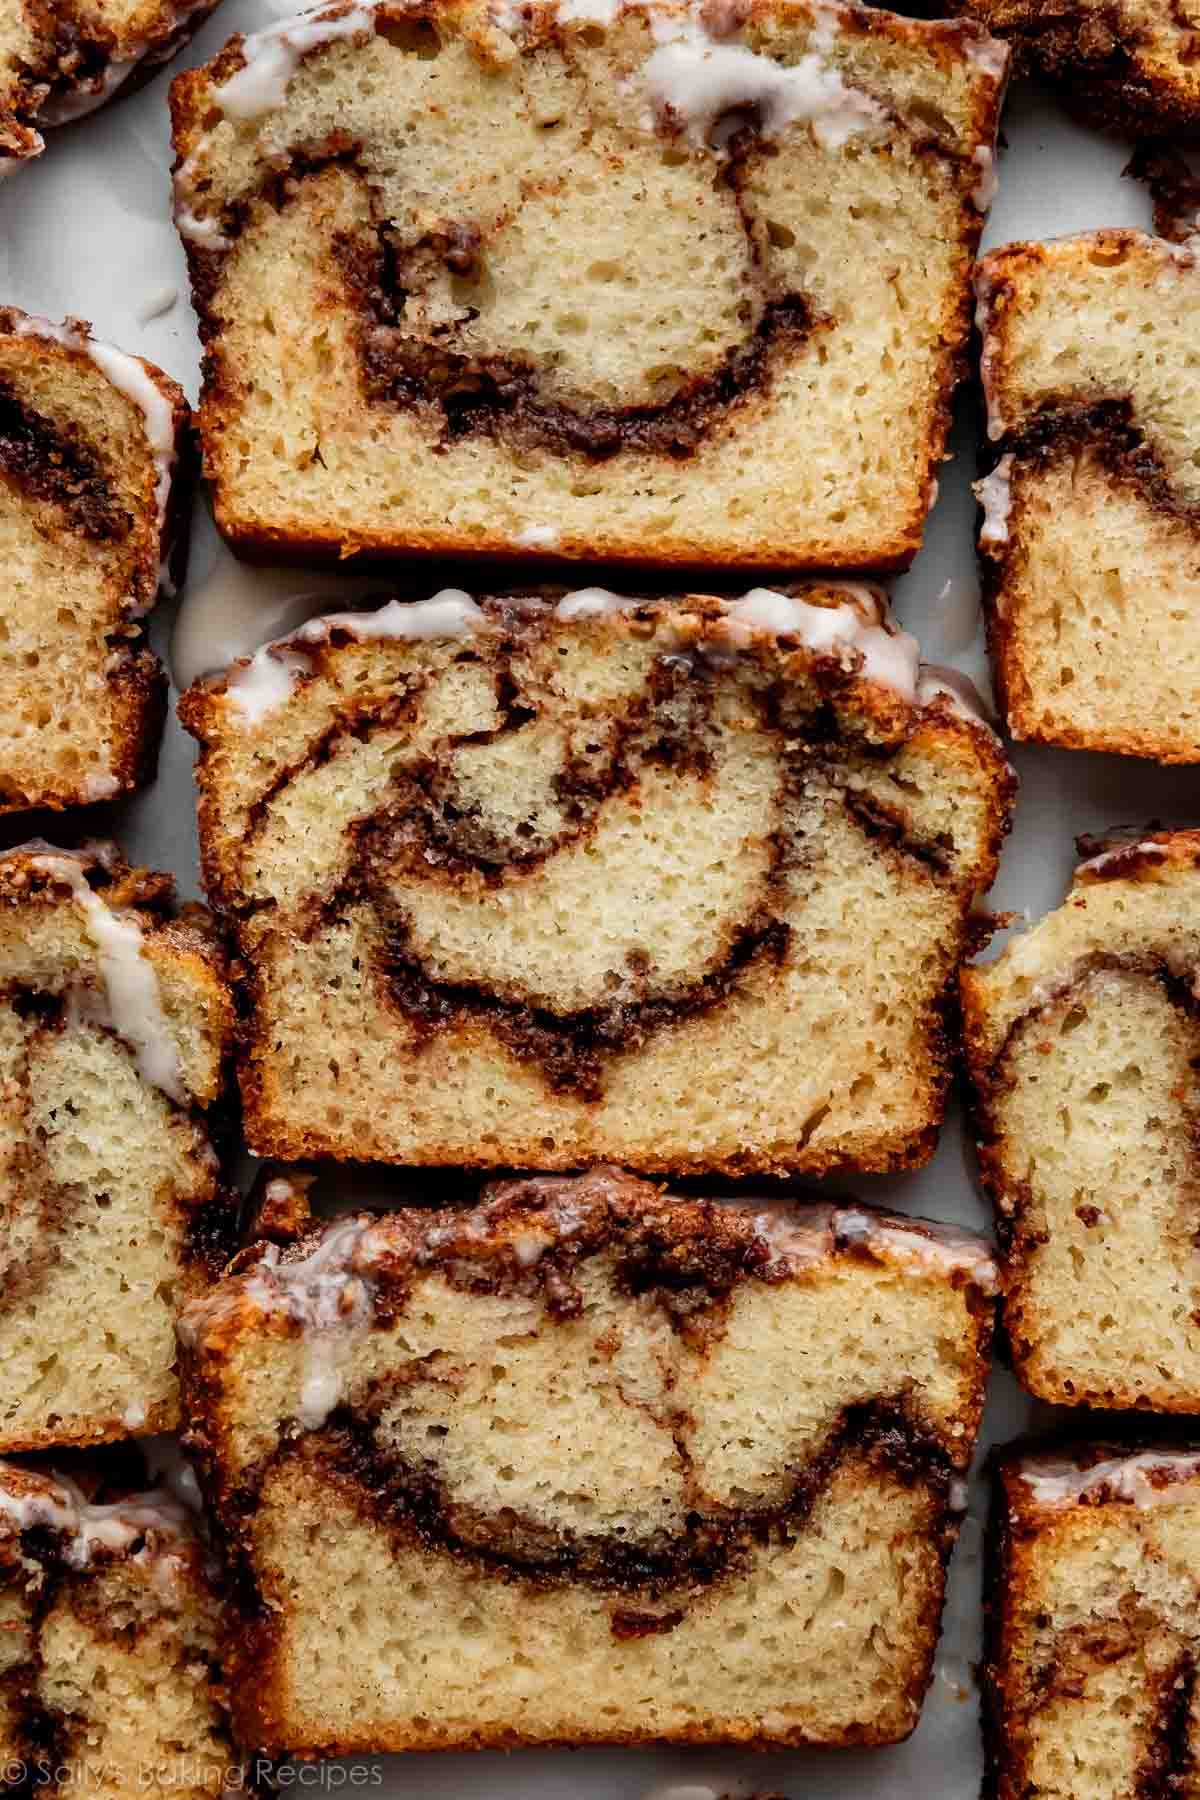 slices of cinnamon swirl bread with icing on top.